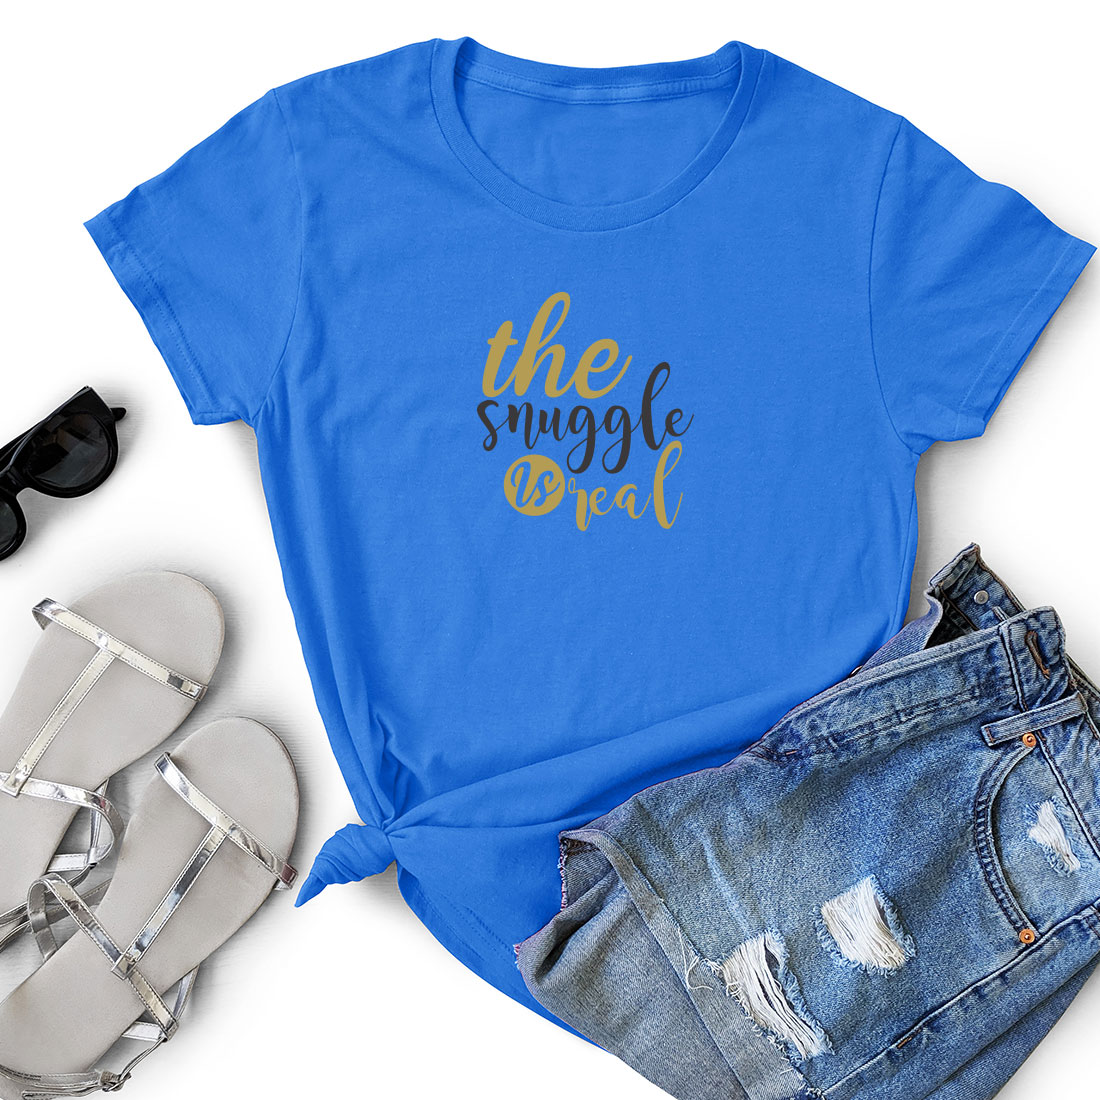 Blue t - shirt that says the single girl next to a pair of shorts.